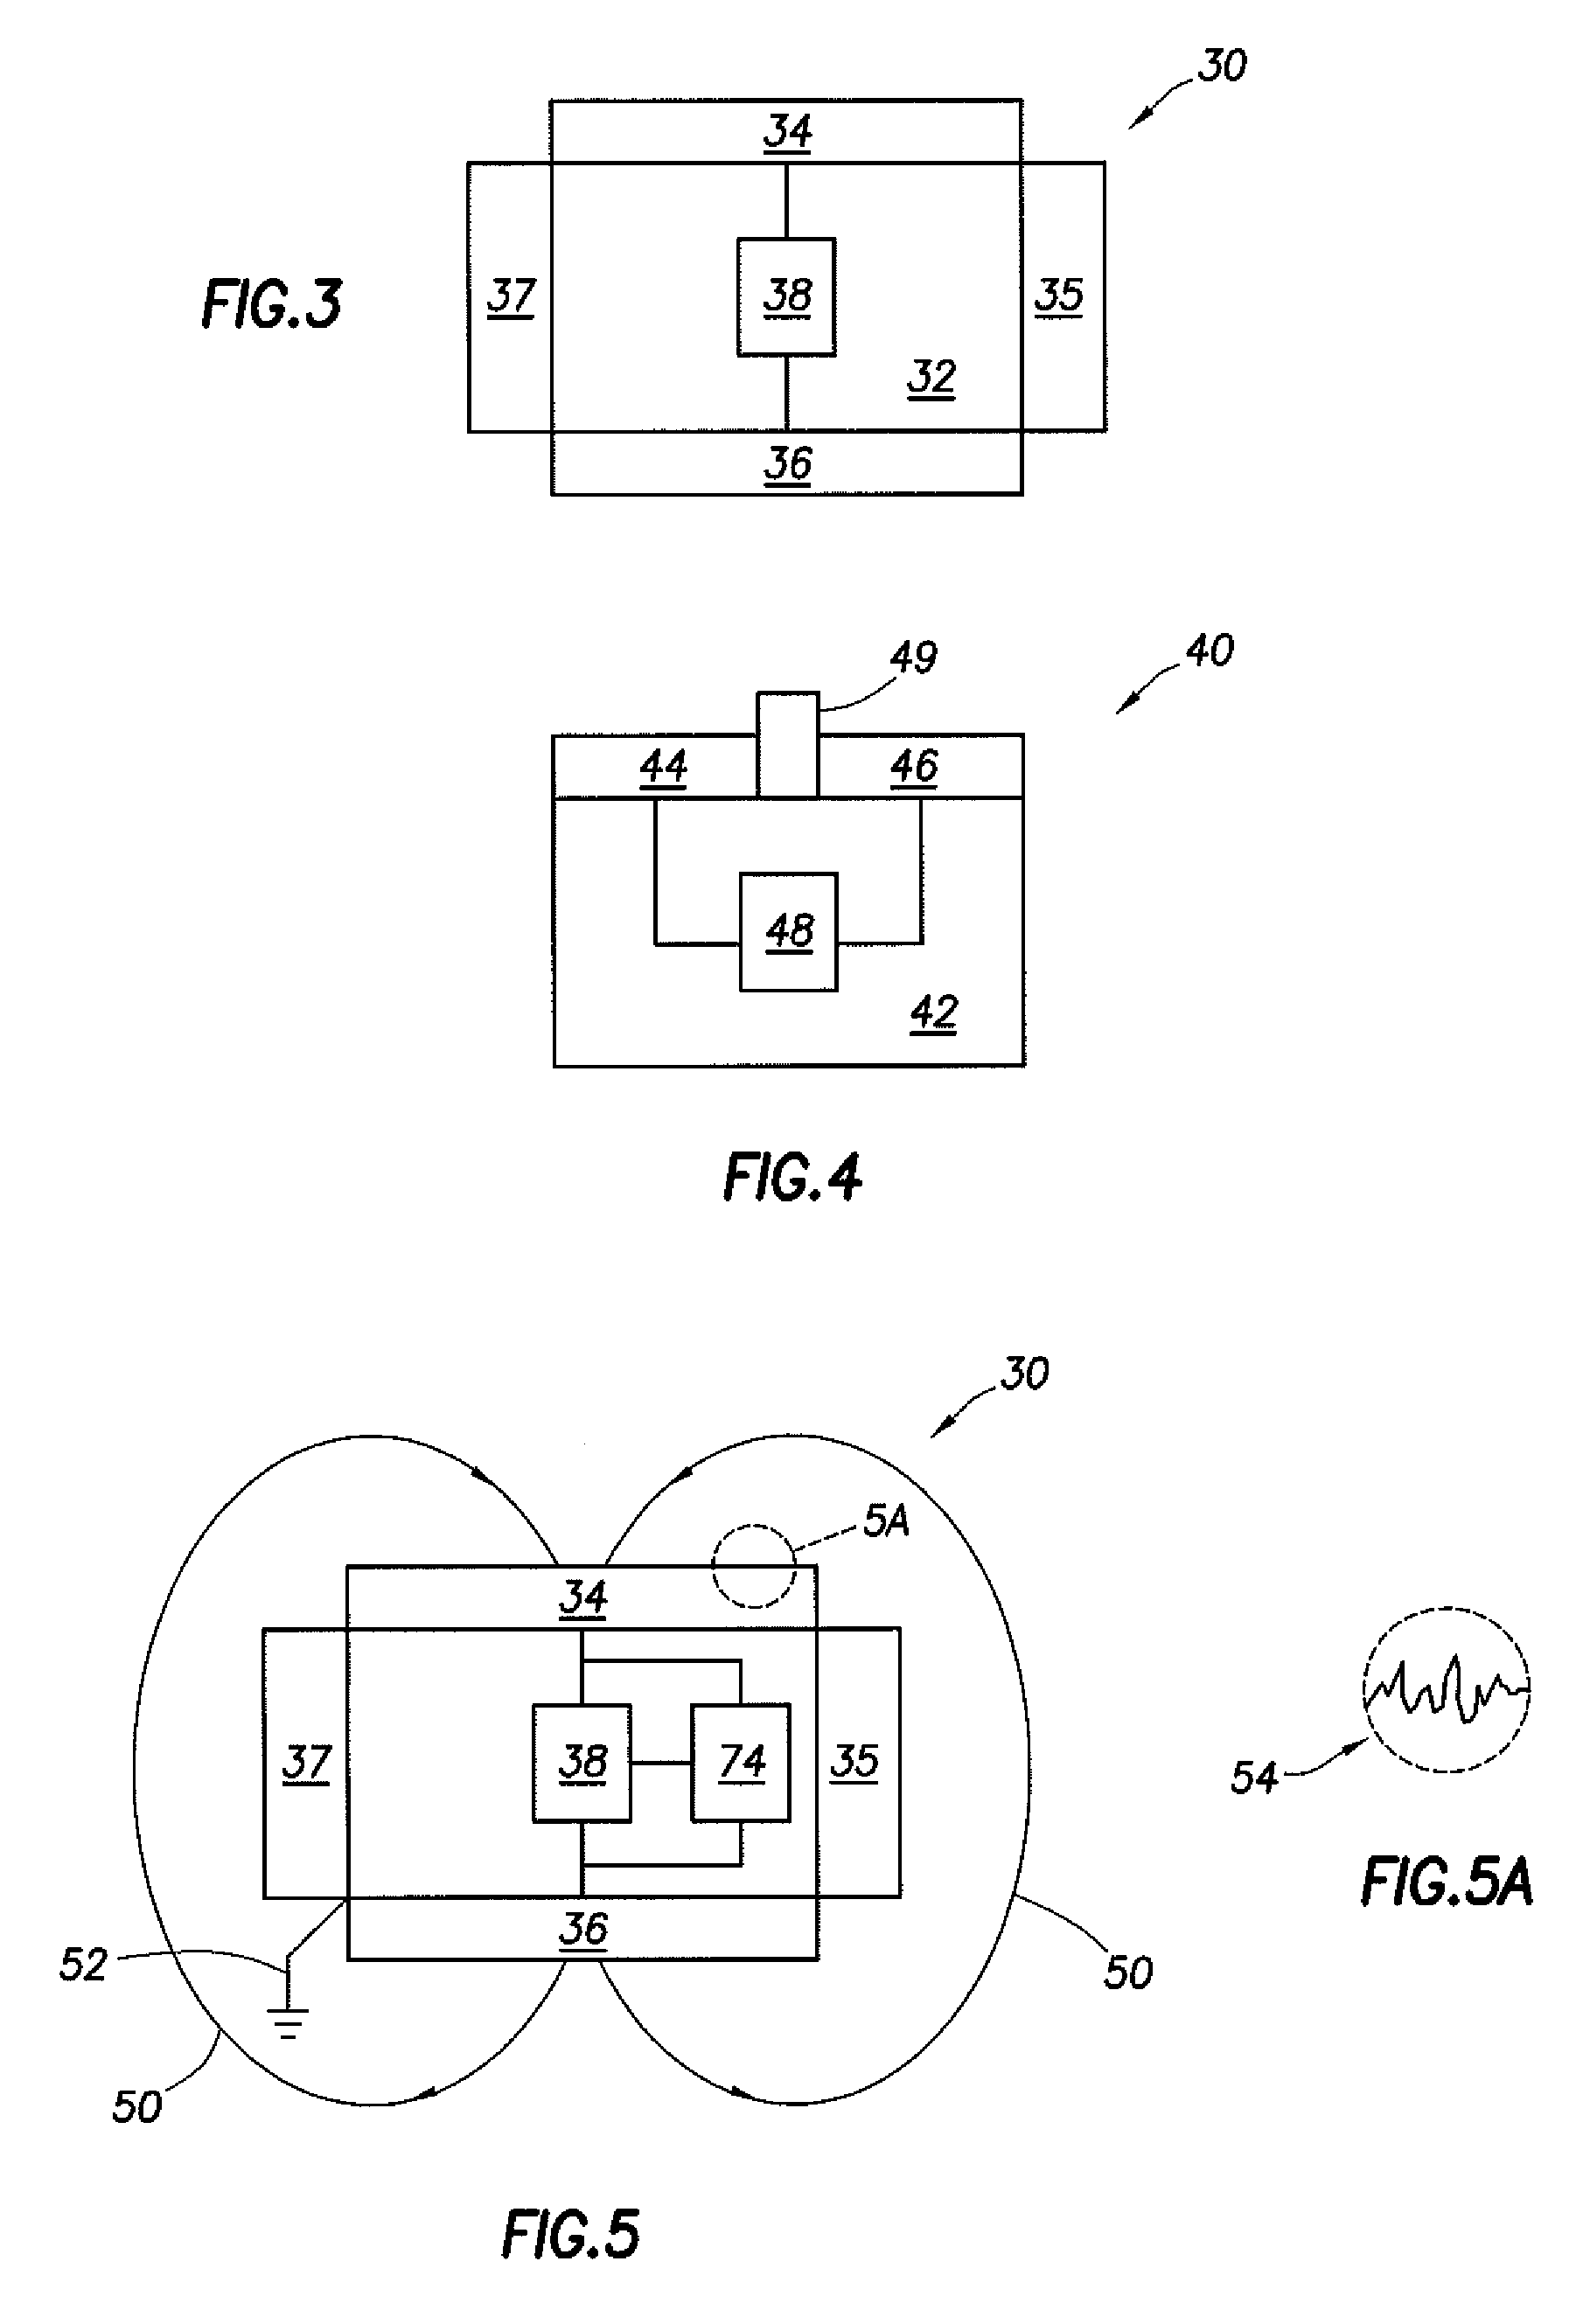 Communication system incorporated in an ingestible product